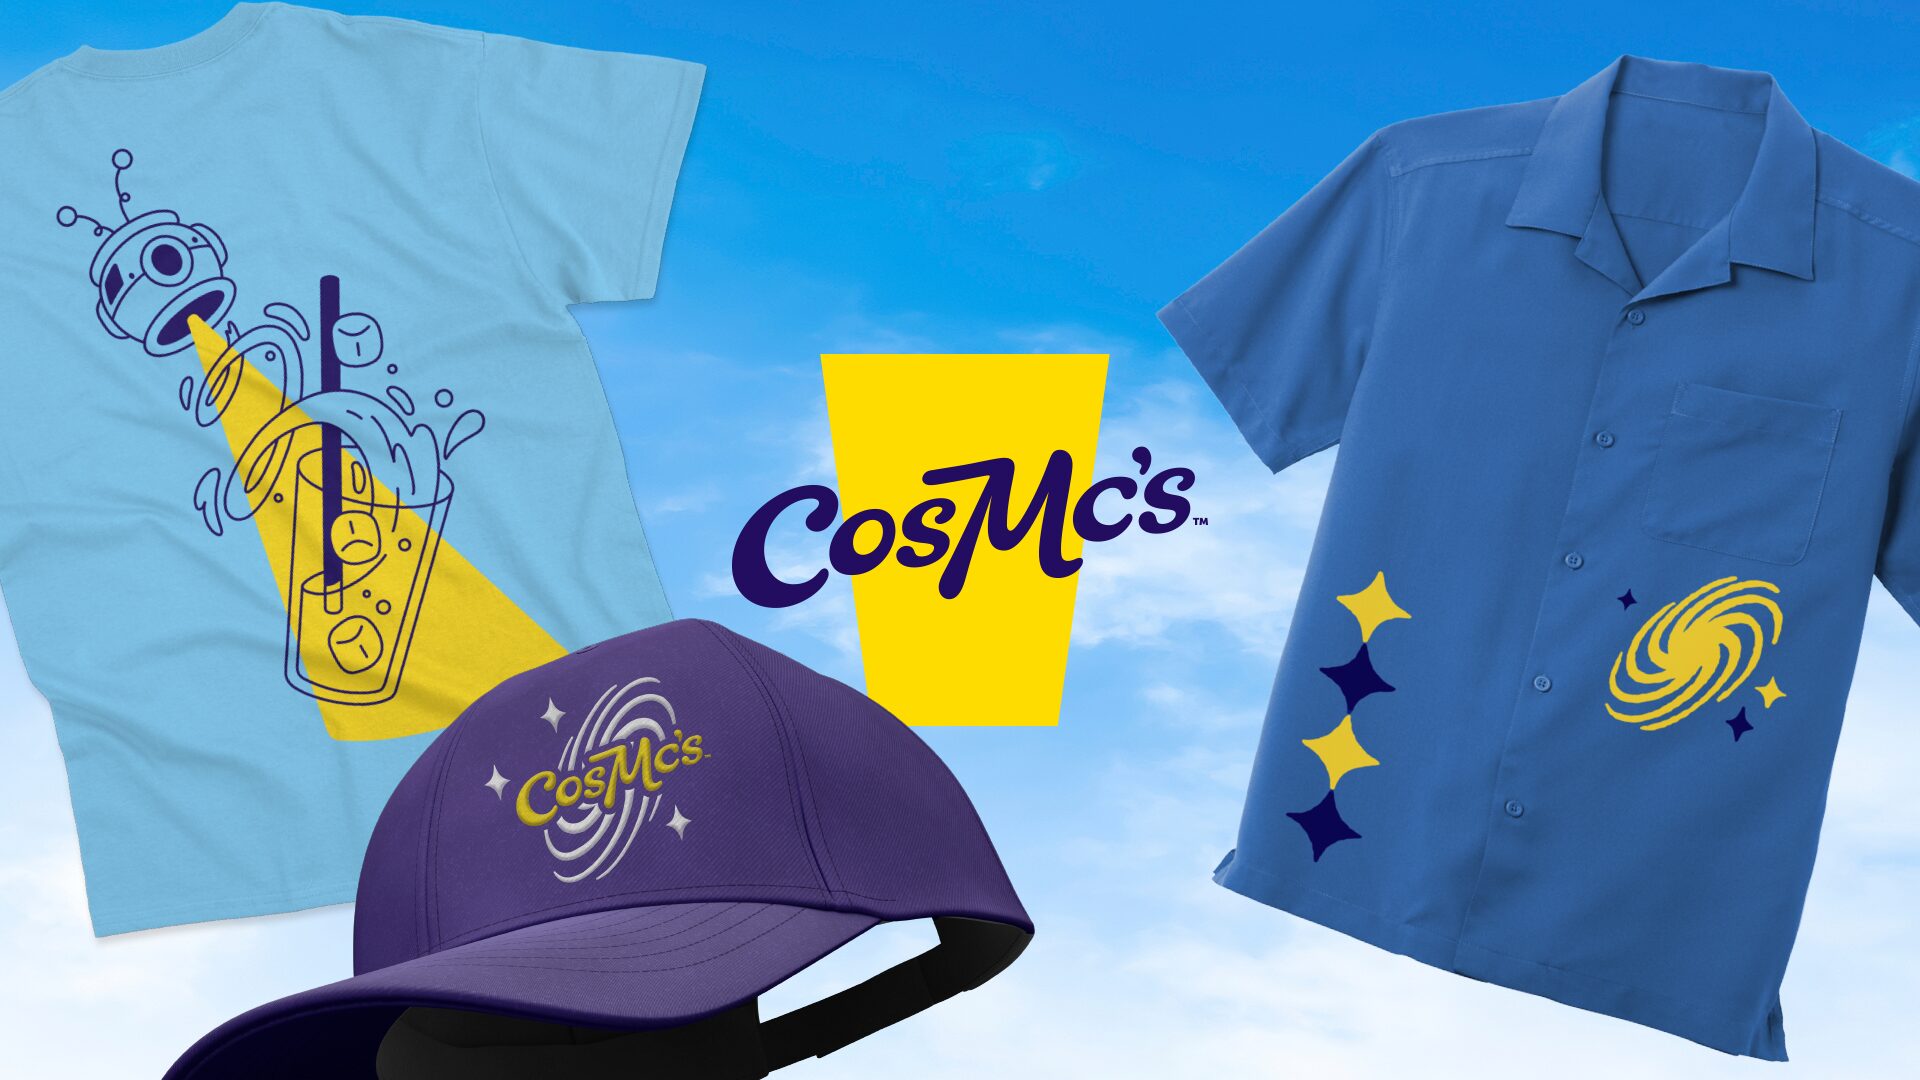 Image of CosMc's team uniforms featuring two shirts and a hat with the logo